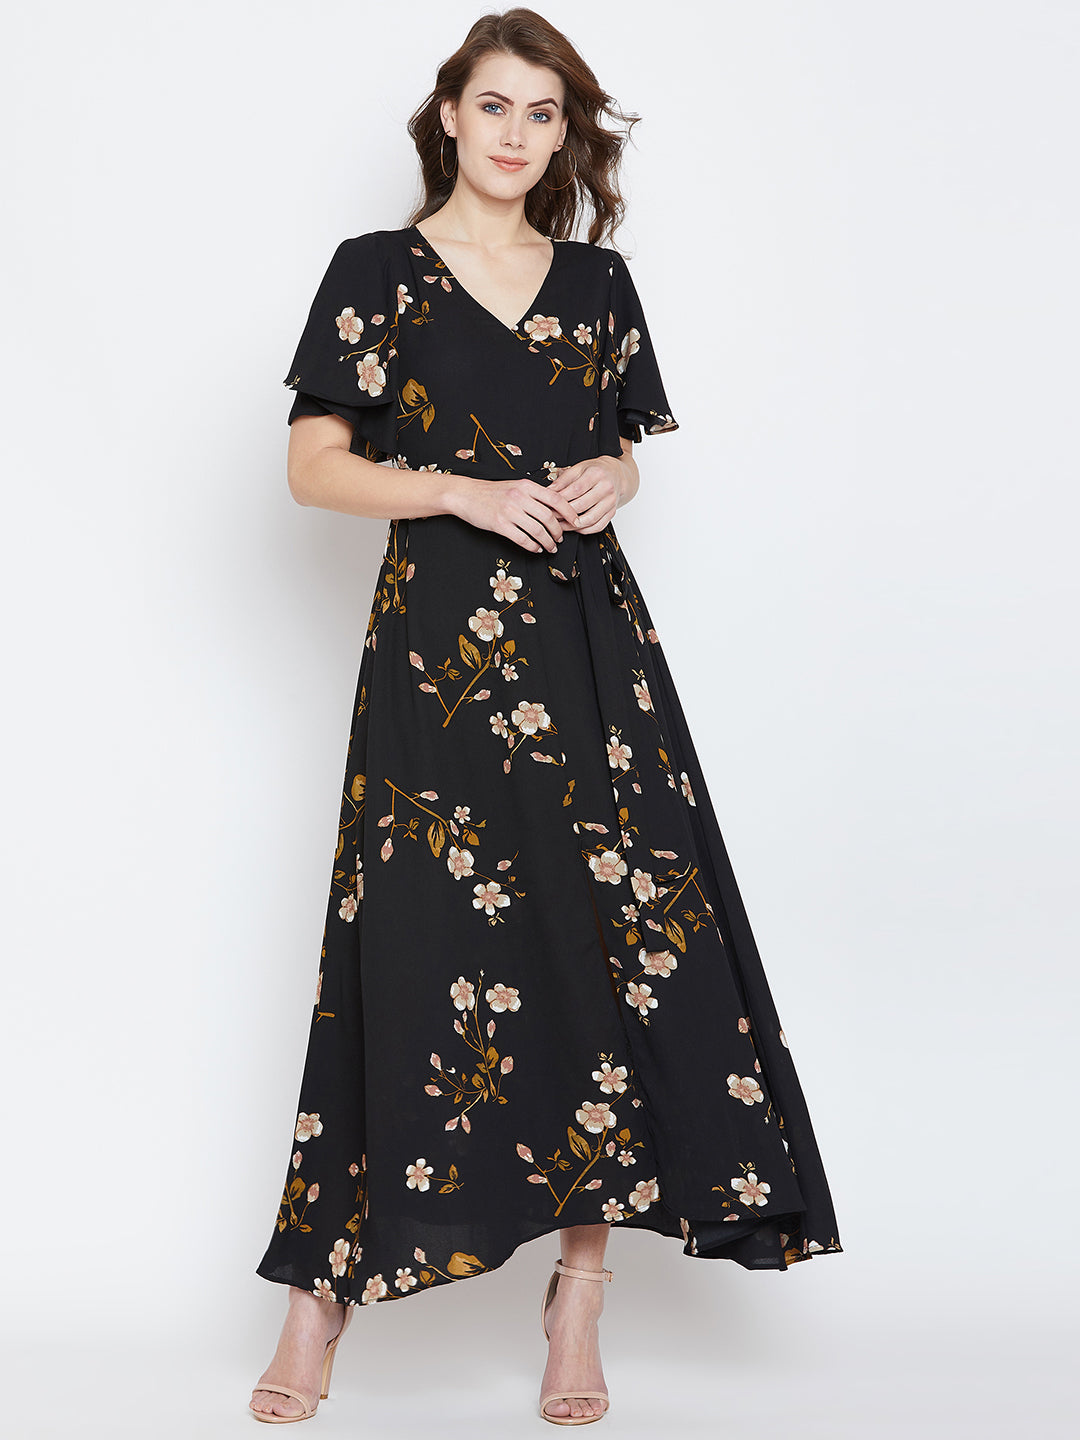 Buy Berrylush Maxi & Long Dresses online - 238 products | FASHIOLA.in